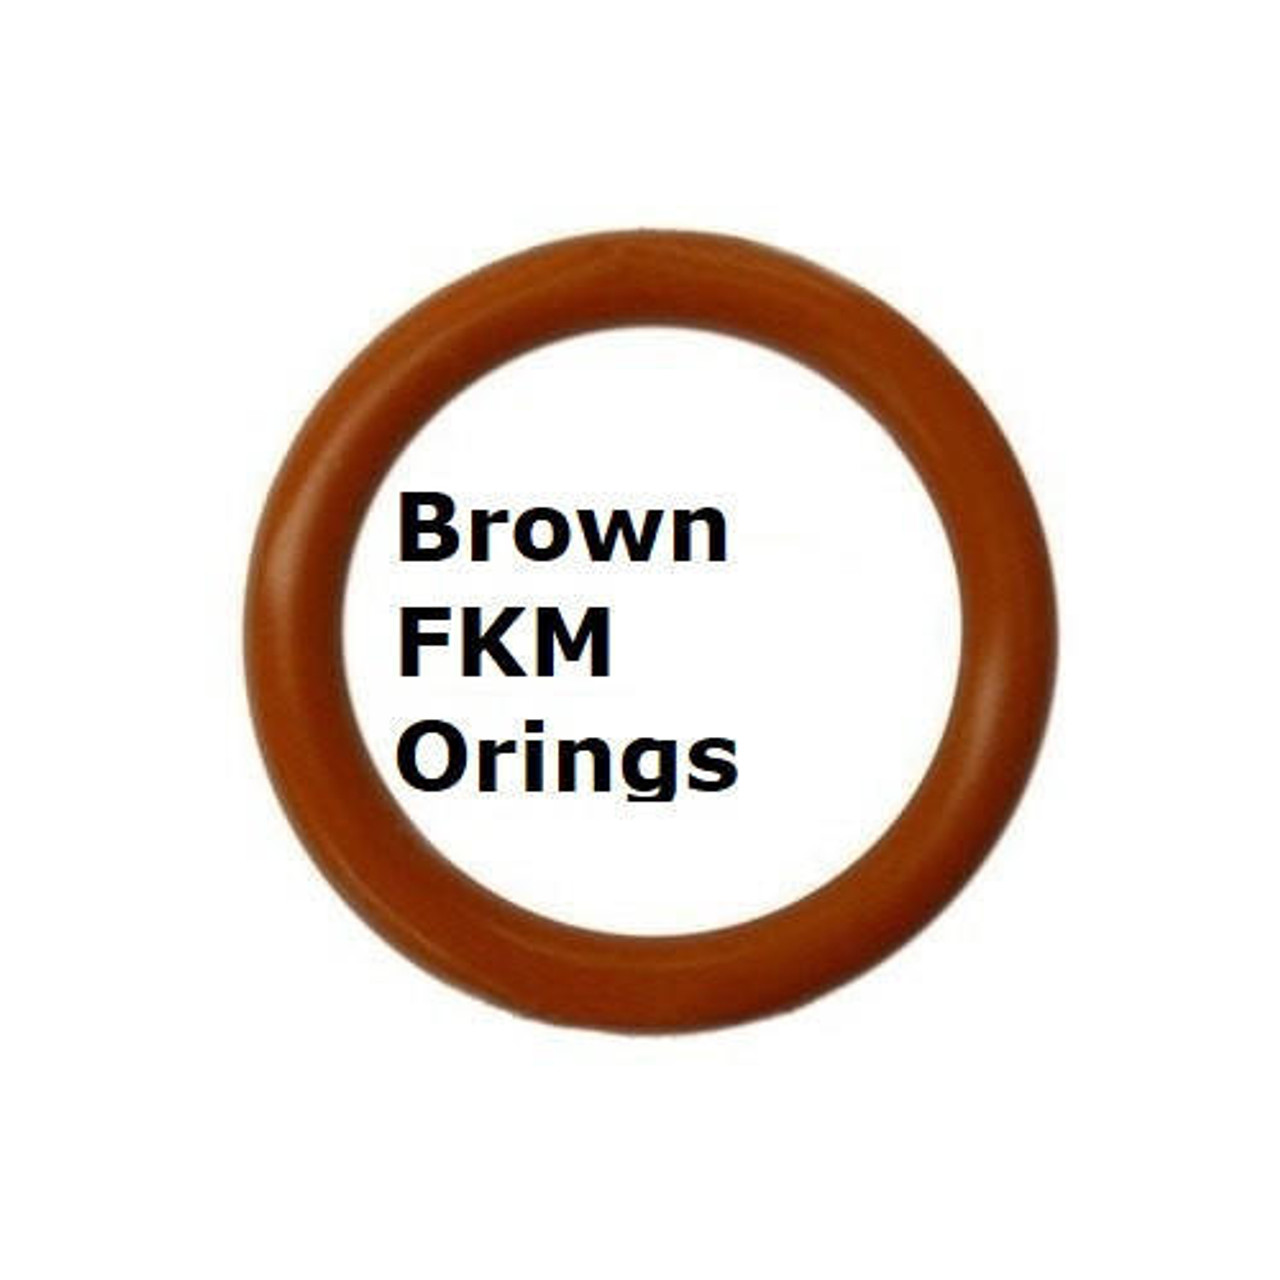 FKM Heat Resistant Brown O-rings  Size 424 Price for 1 pc